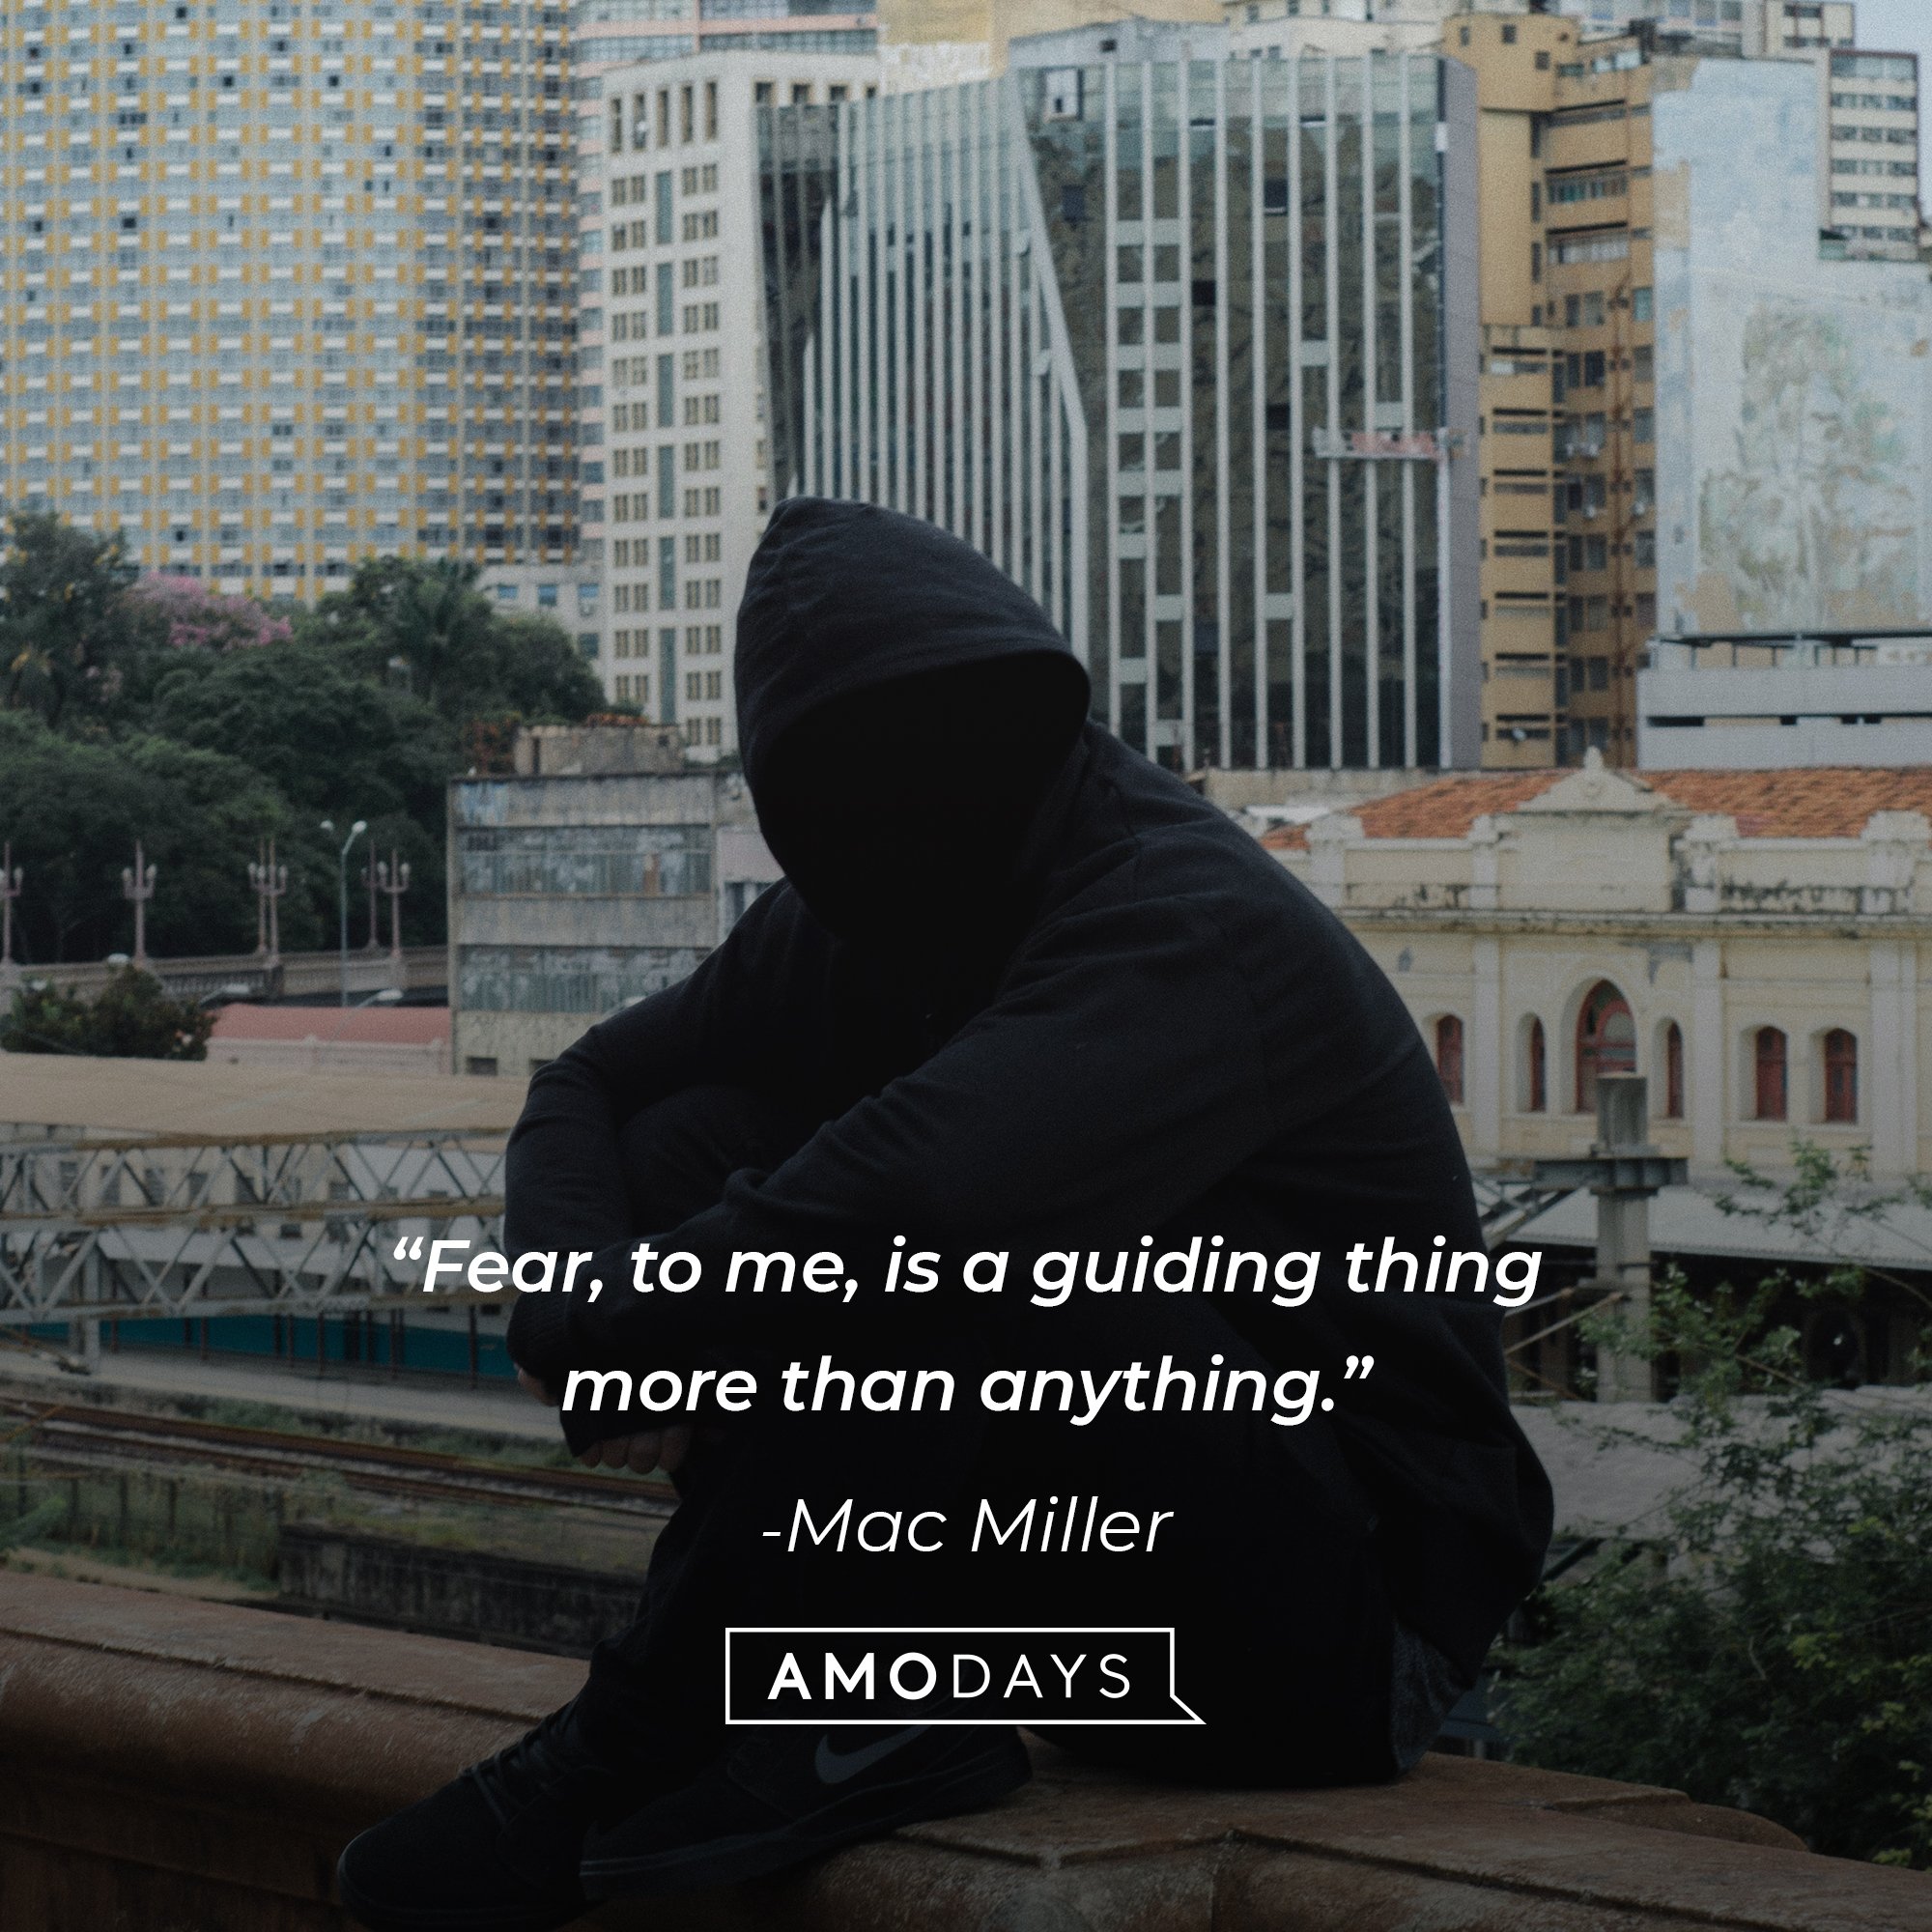 Mac Miller‘s quote: “Fear, to me, is a guiding thing more than anything.” │Image: AmoDays